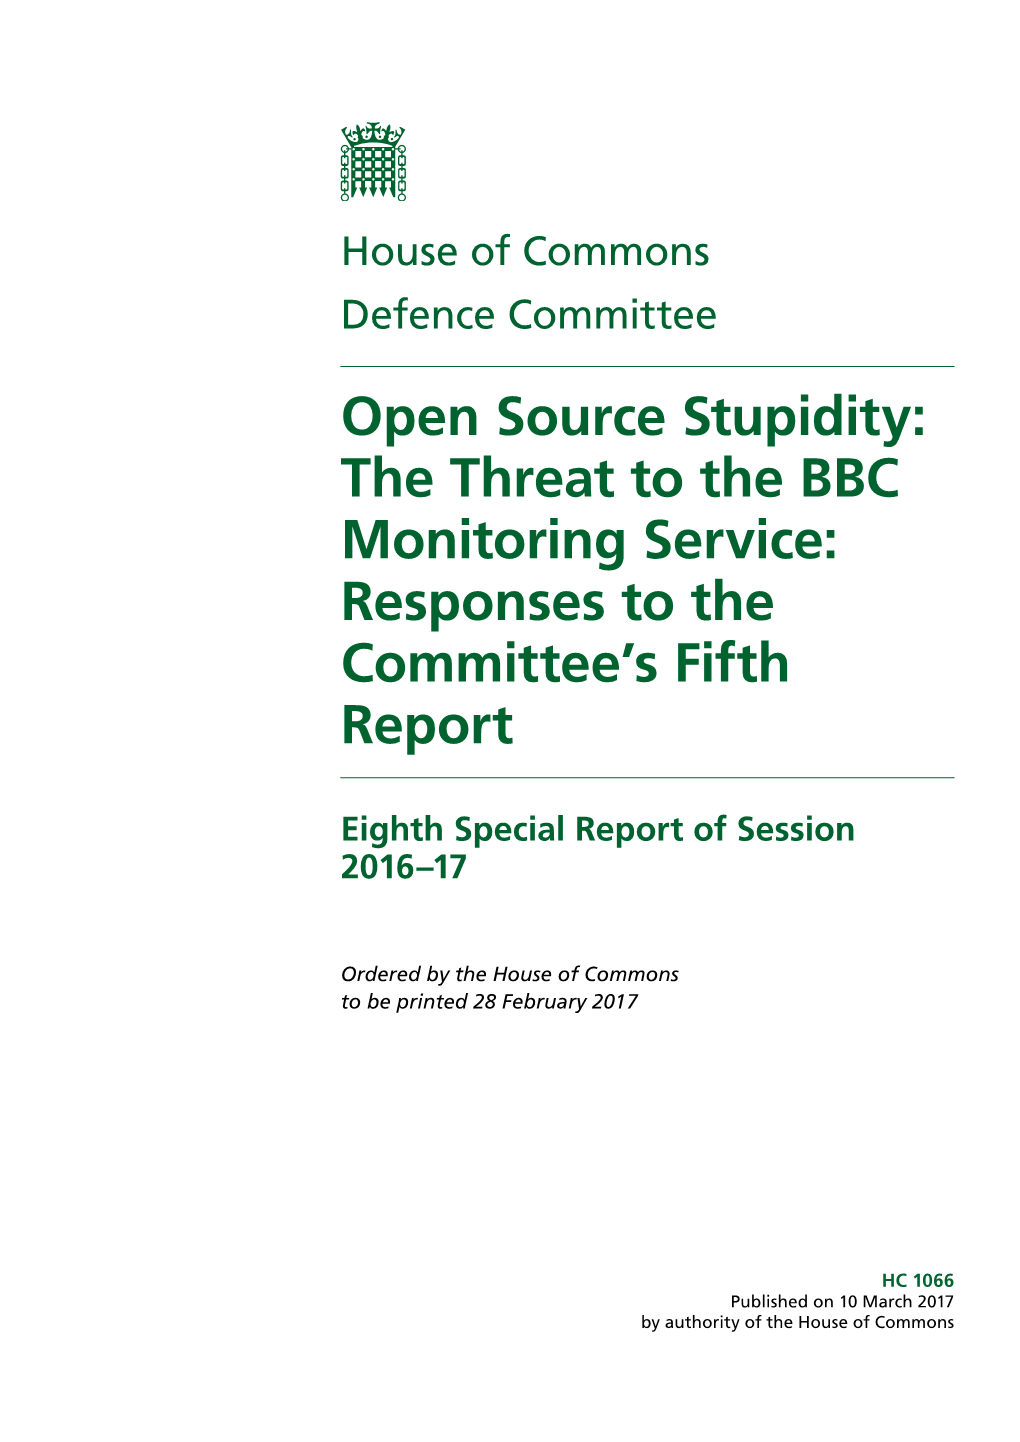 Open Source Stupidity: the Threat to the BBC Monitoring Service: Responses to the Committee’S Fifth Report